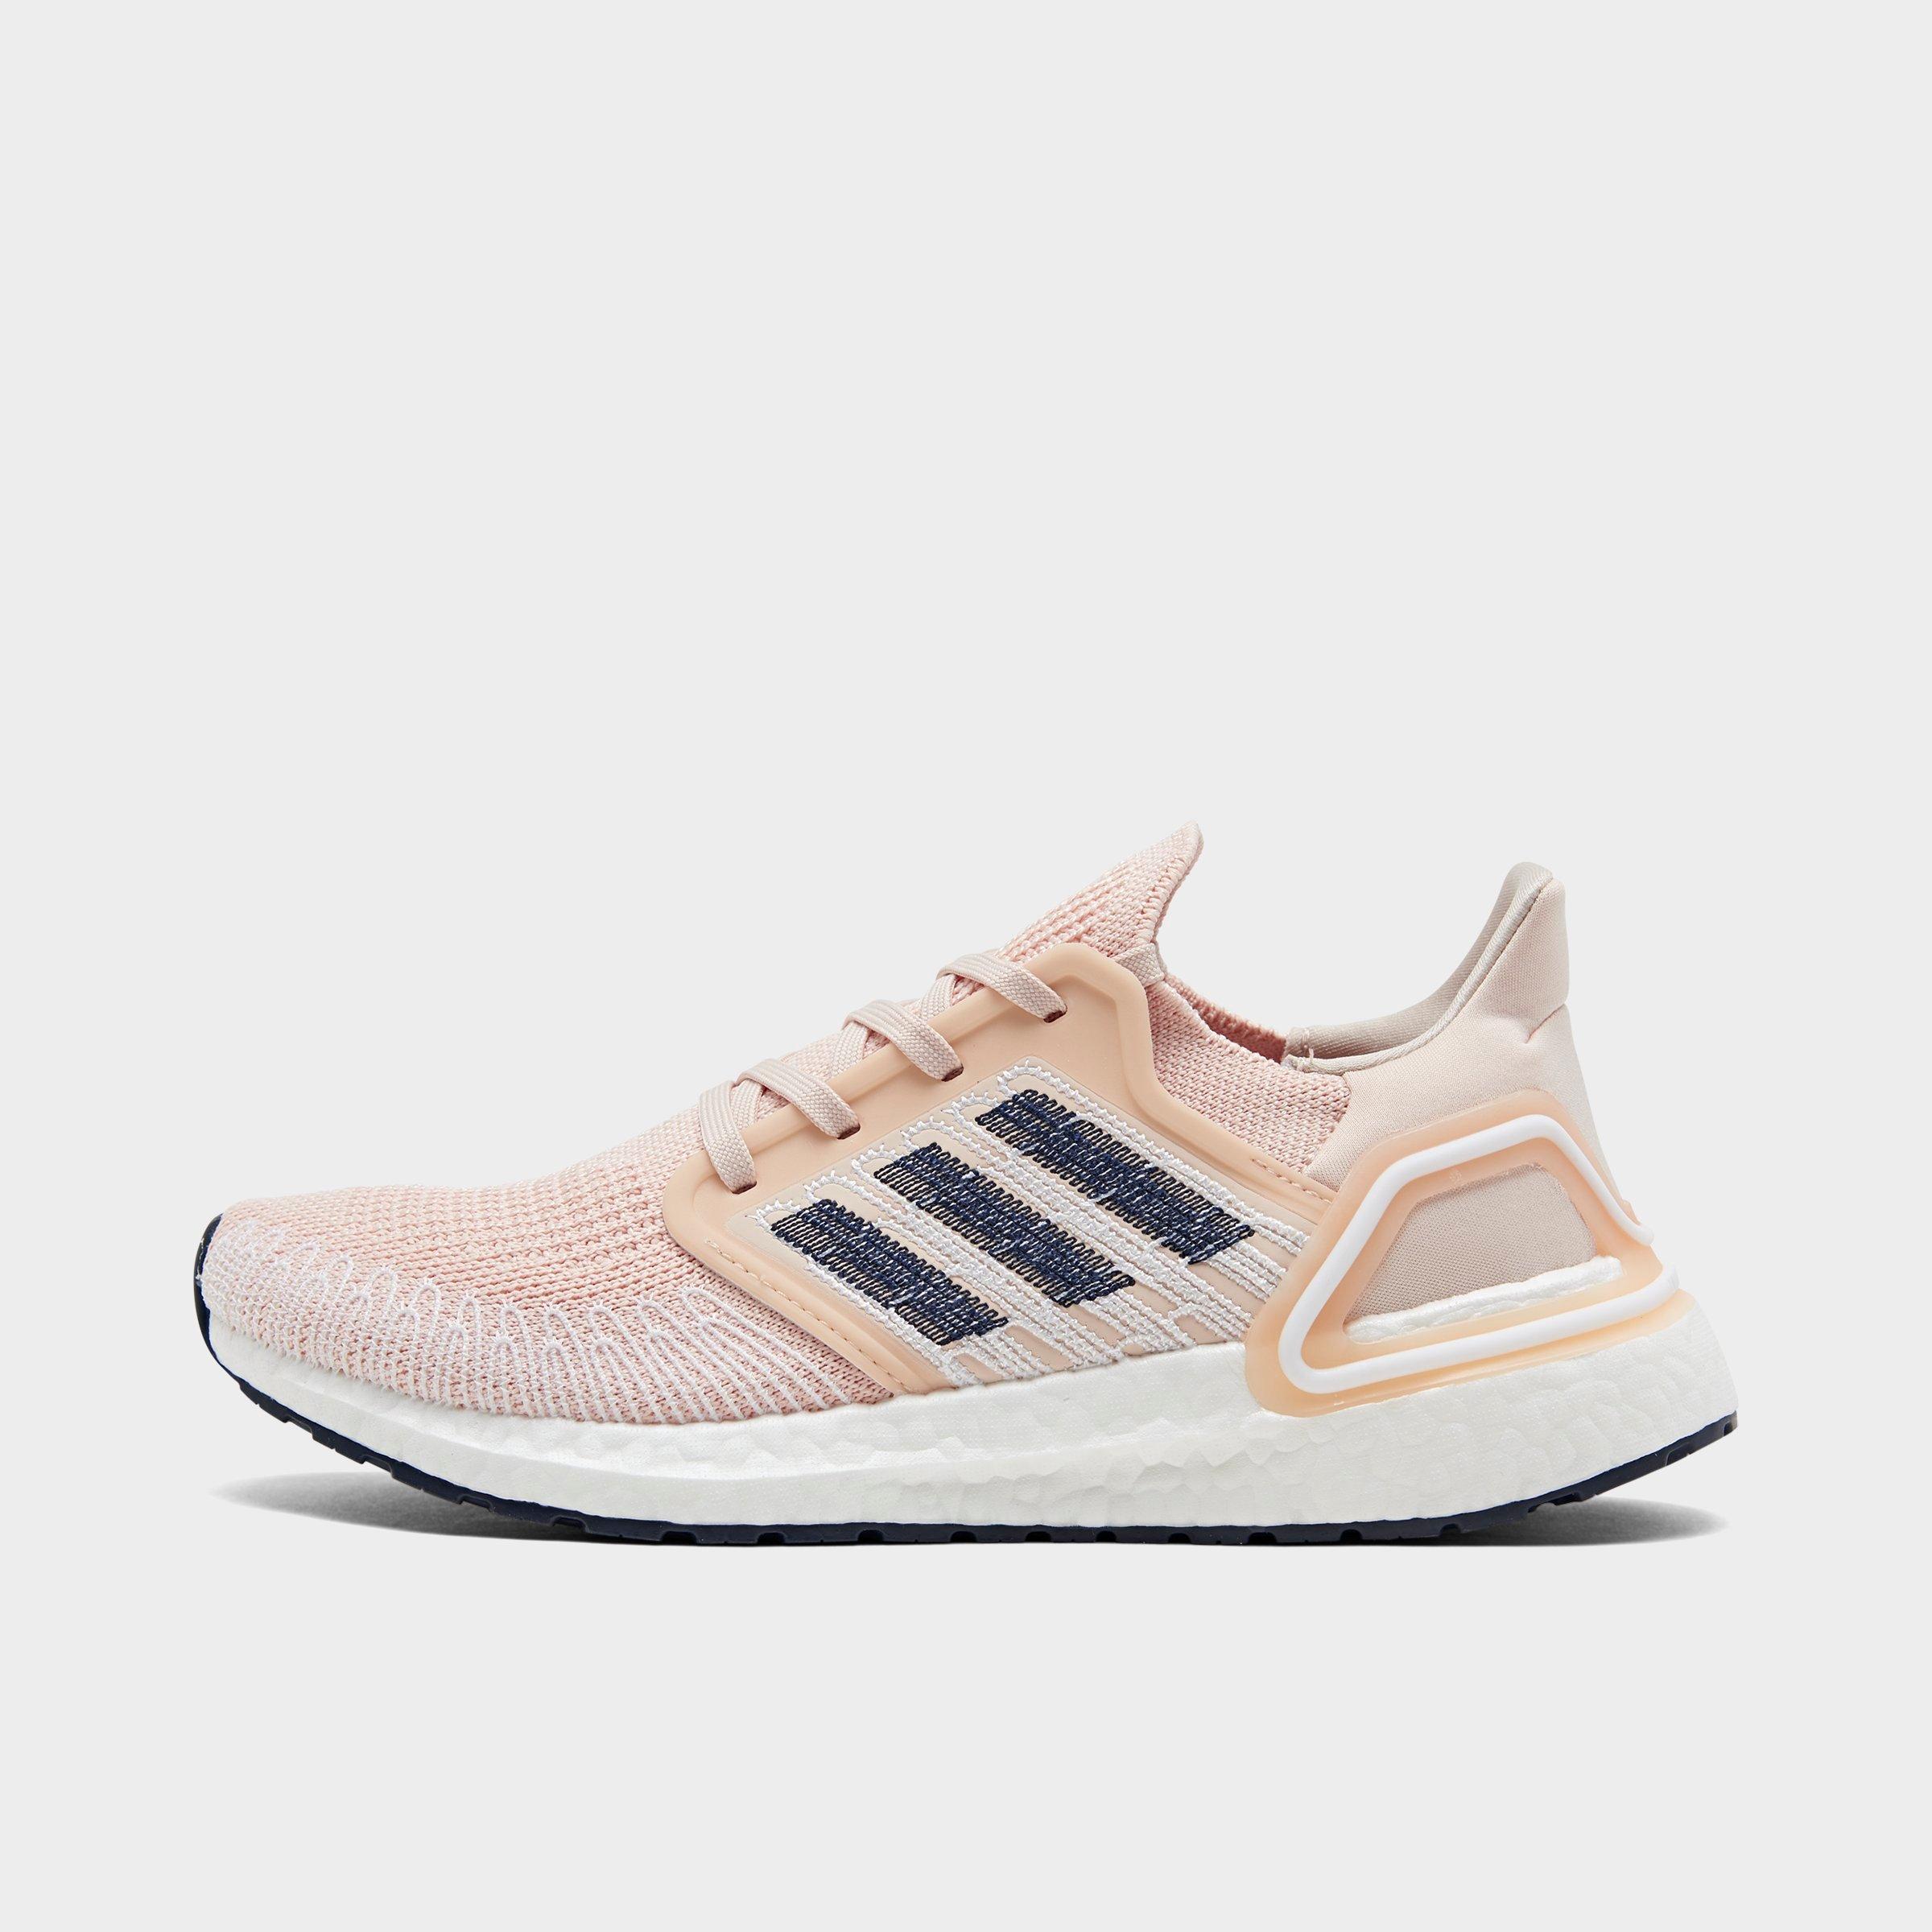 adidas ultra boost ladies running shoes